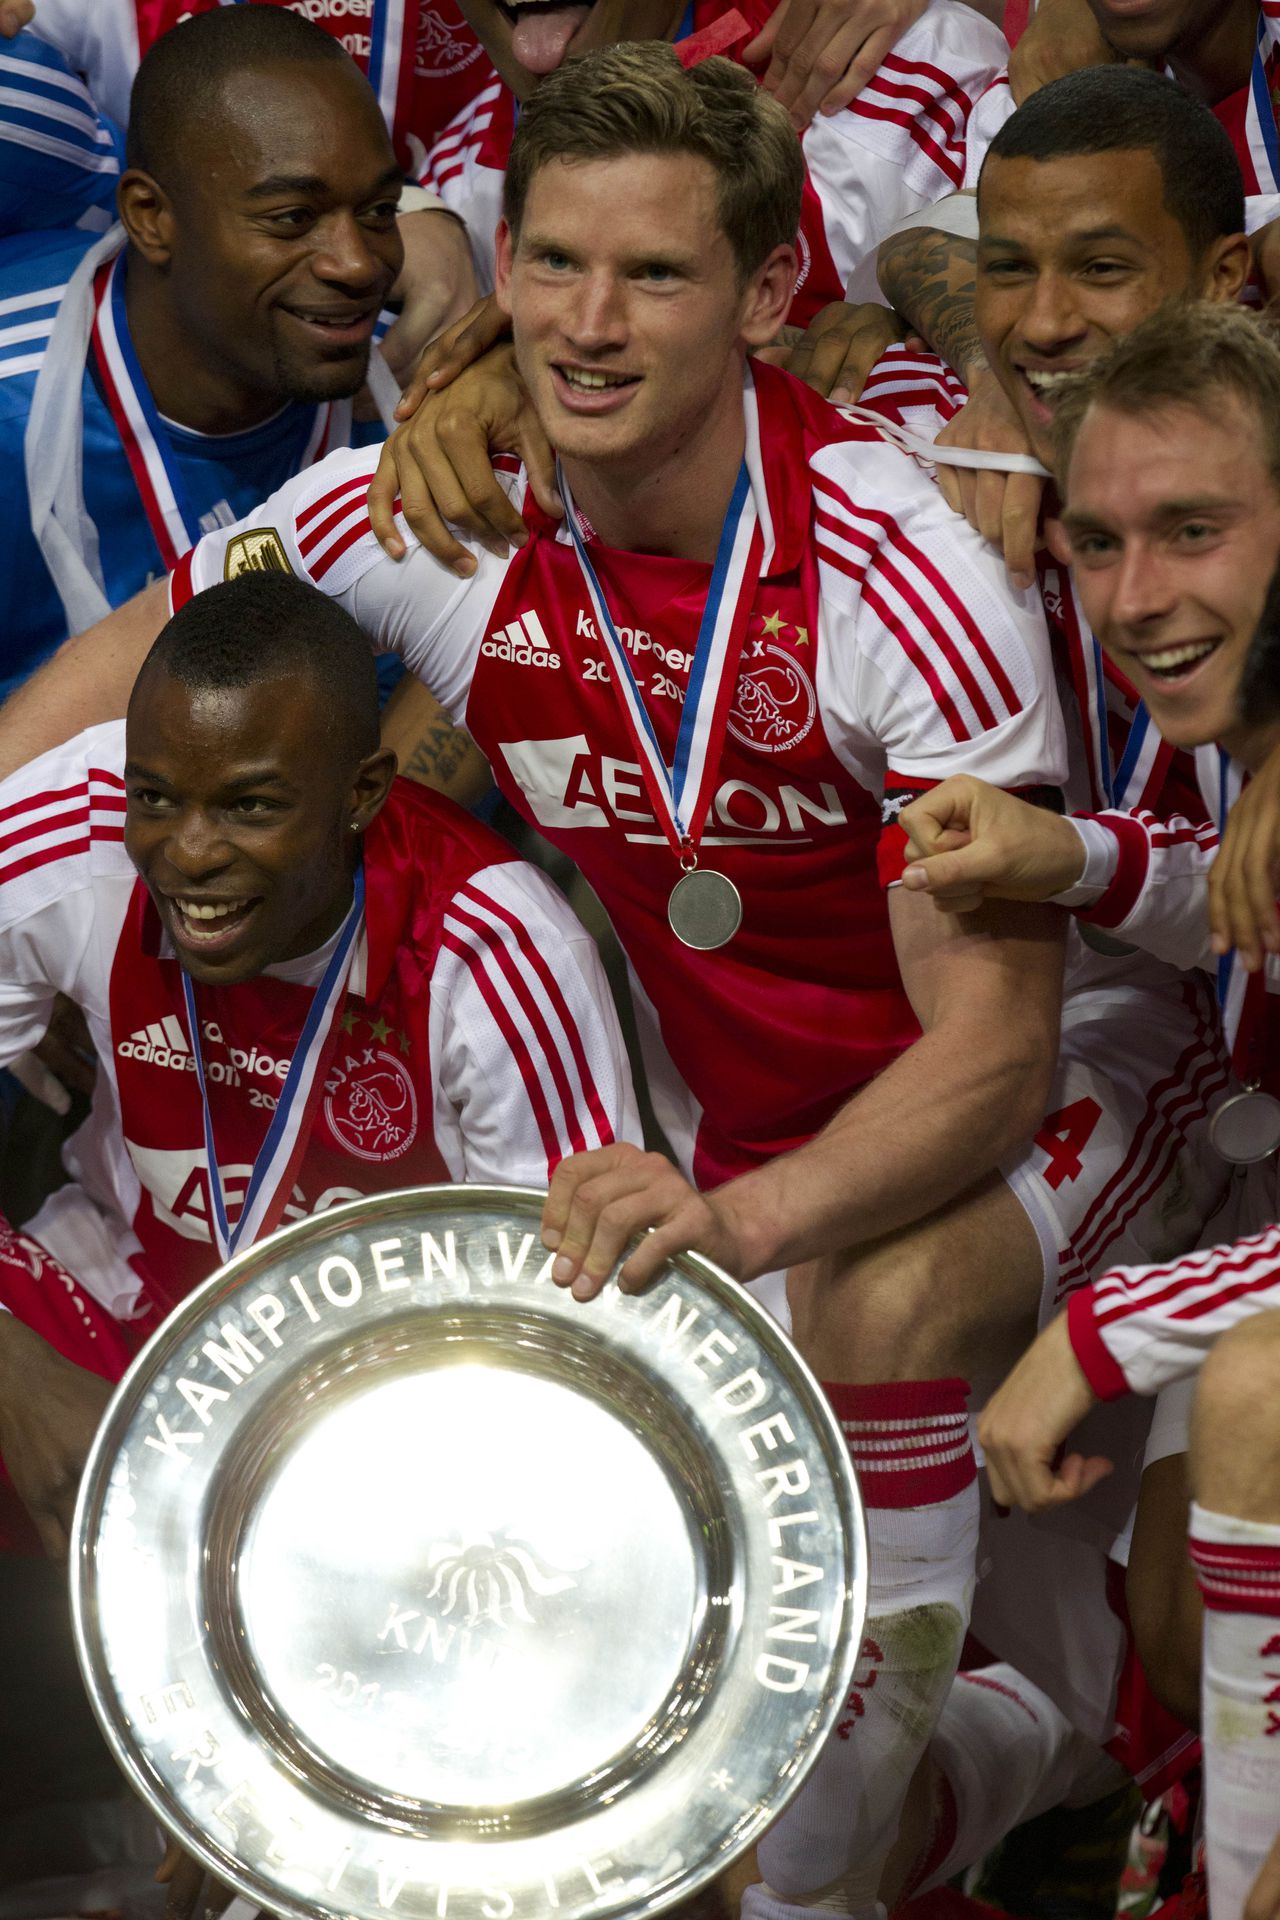 Ajax soccer players with captain Jan Vertonghen, center holding the trophy, celebrate clinching the Dutch Premier League title after defeating VVV Venlo with a 2-0 score at ArenA stadium in Amsterdam, Netherlands, Wednesday May 2, 2012. (AP Photo/Peter Dejong)